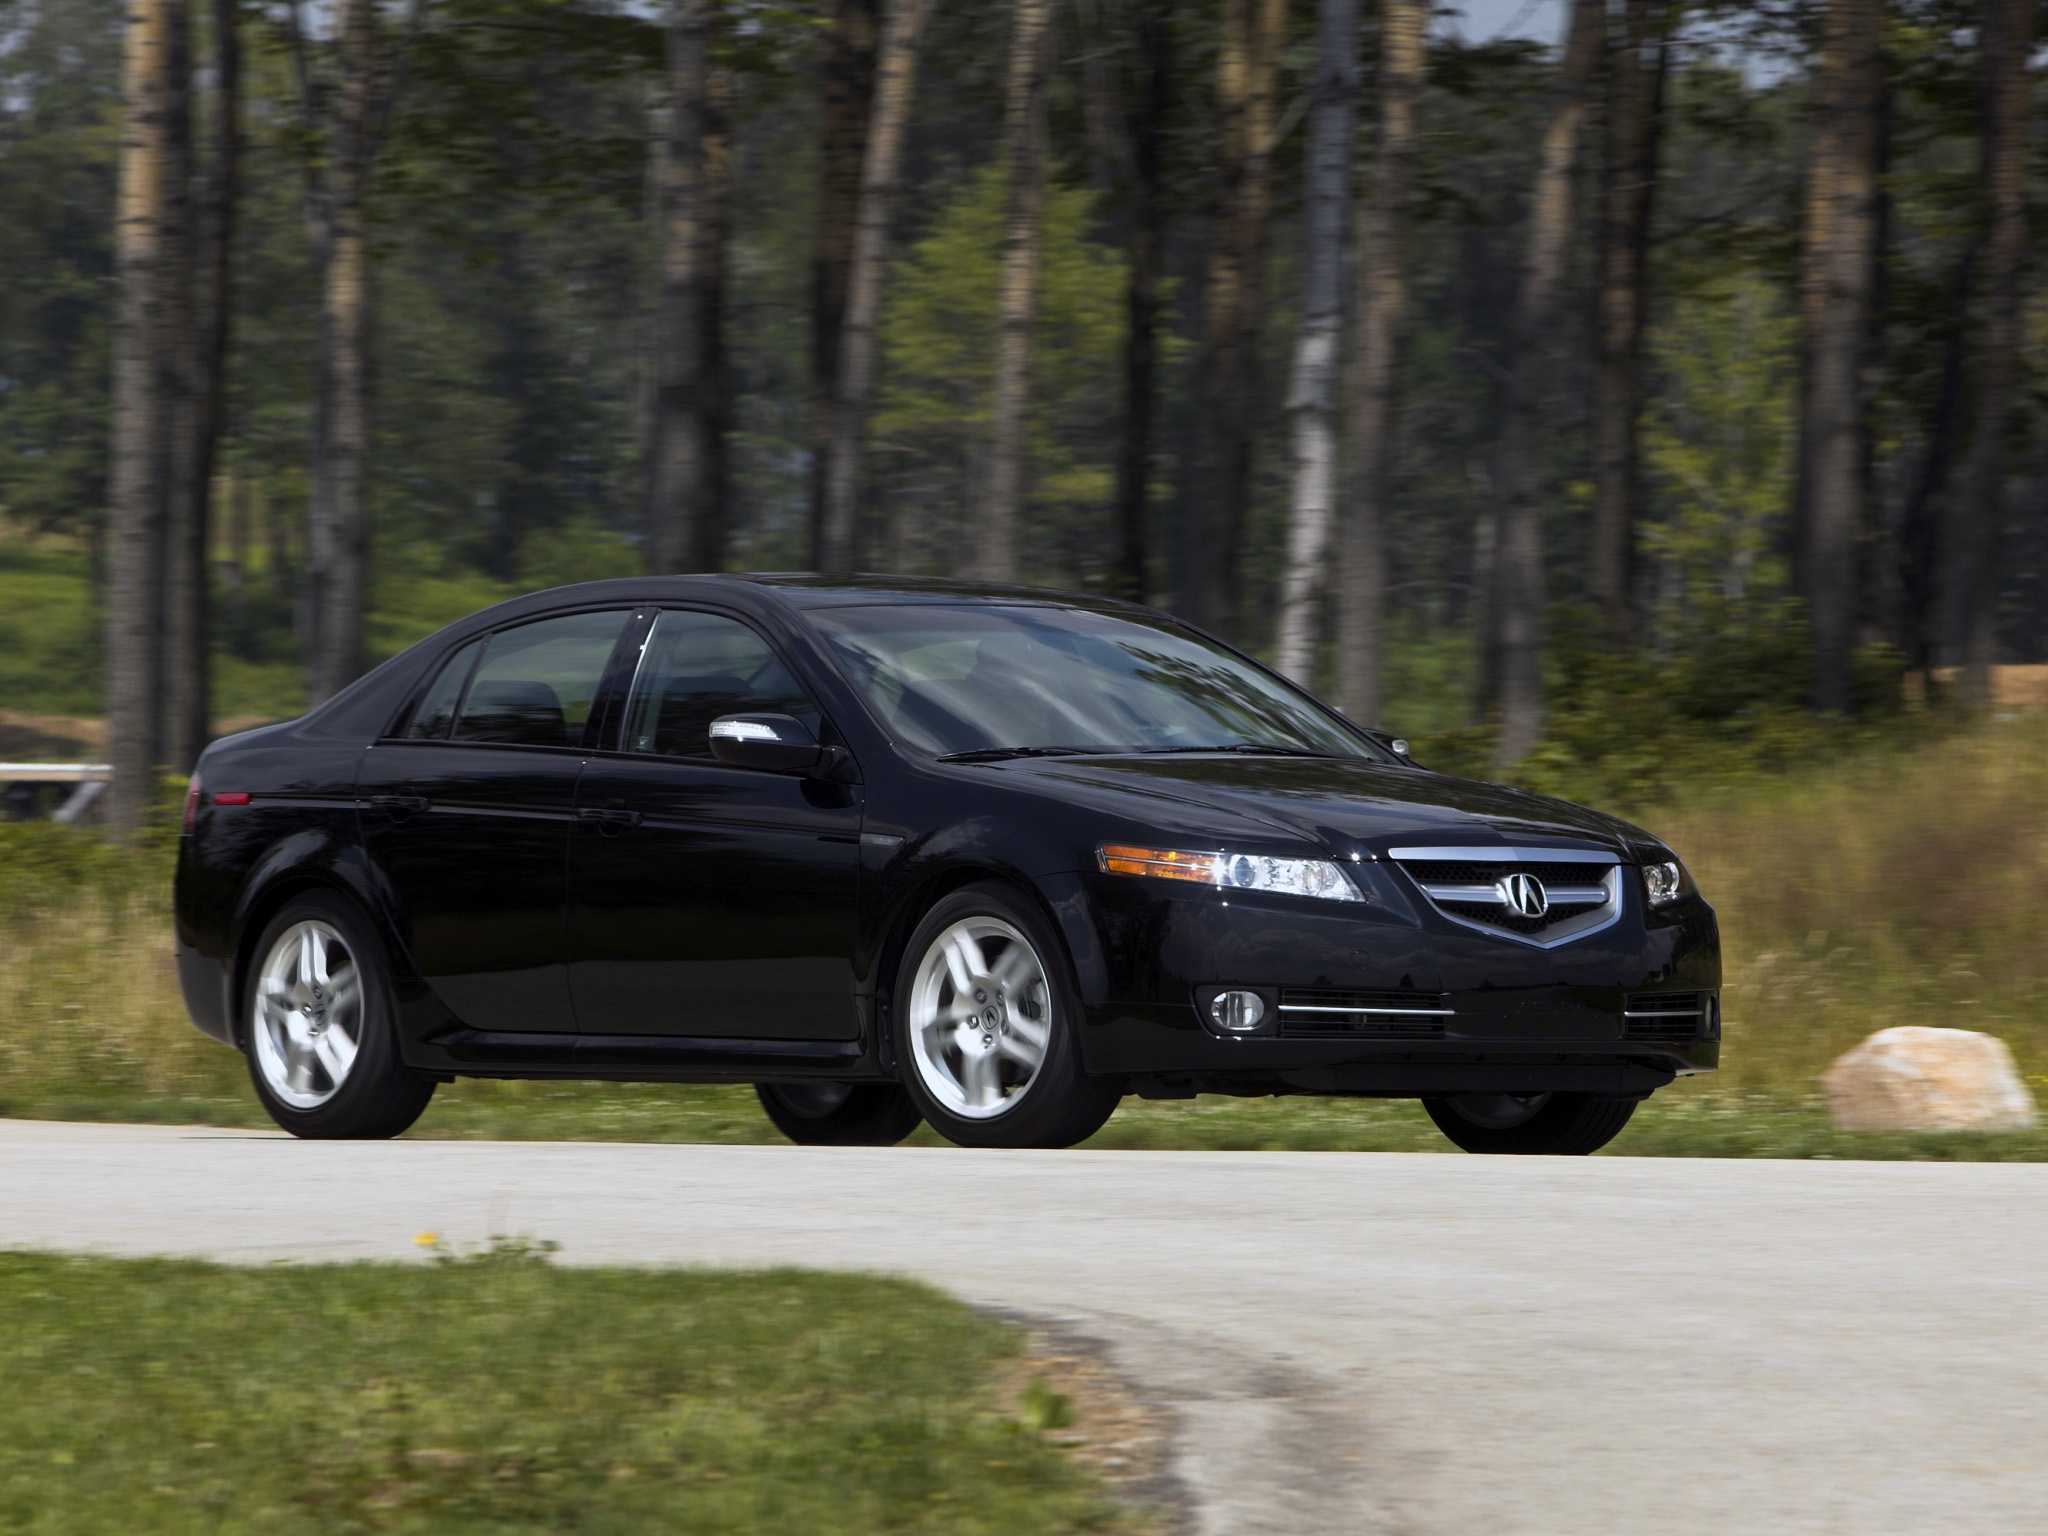 Mobile wallpaper auto, nature, grass, acura, cars, black, forest, asphalt, side view, style, akura, tl, 2007